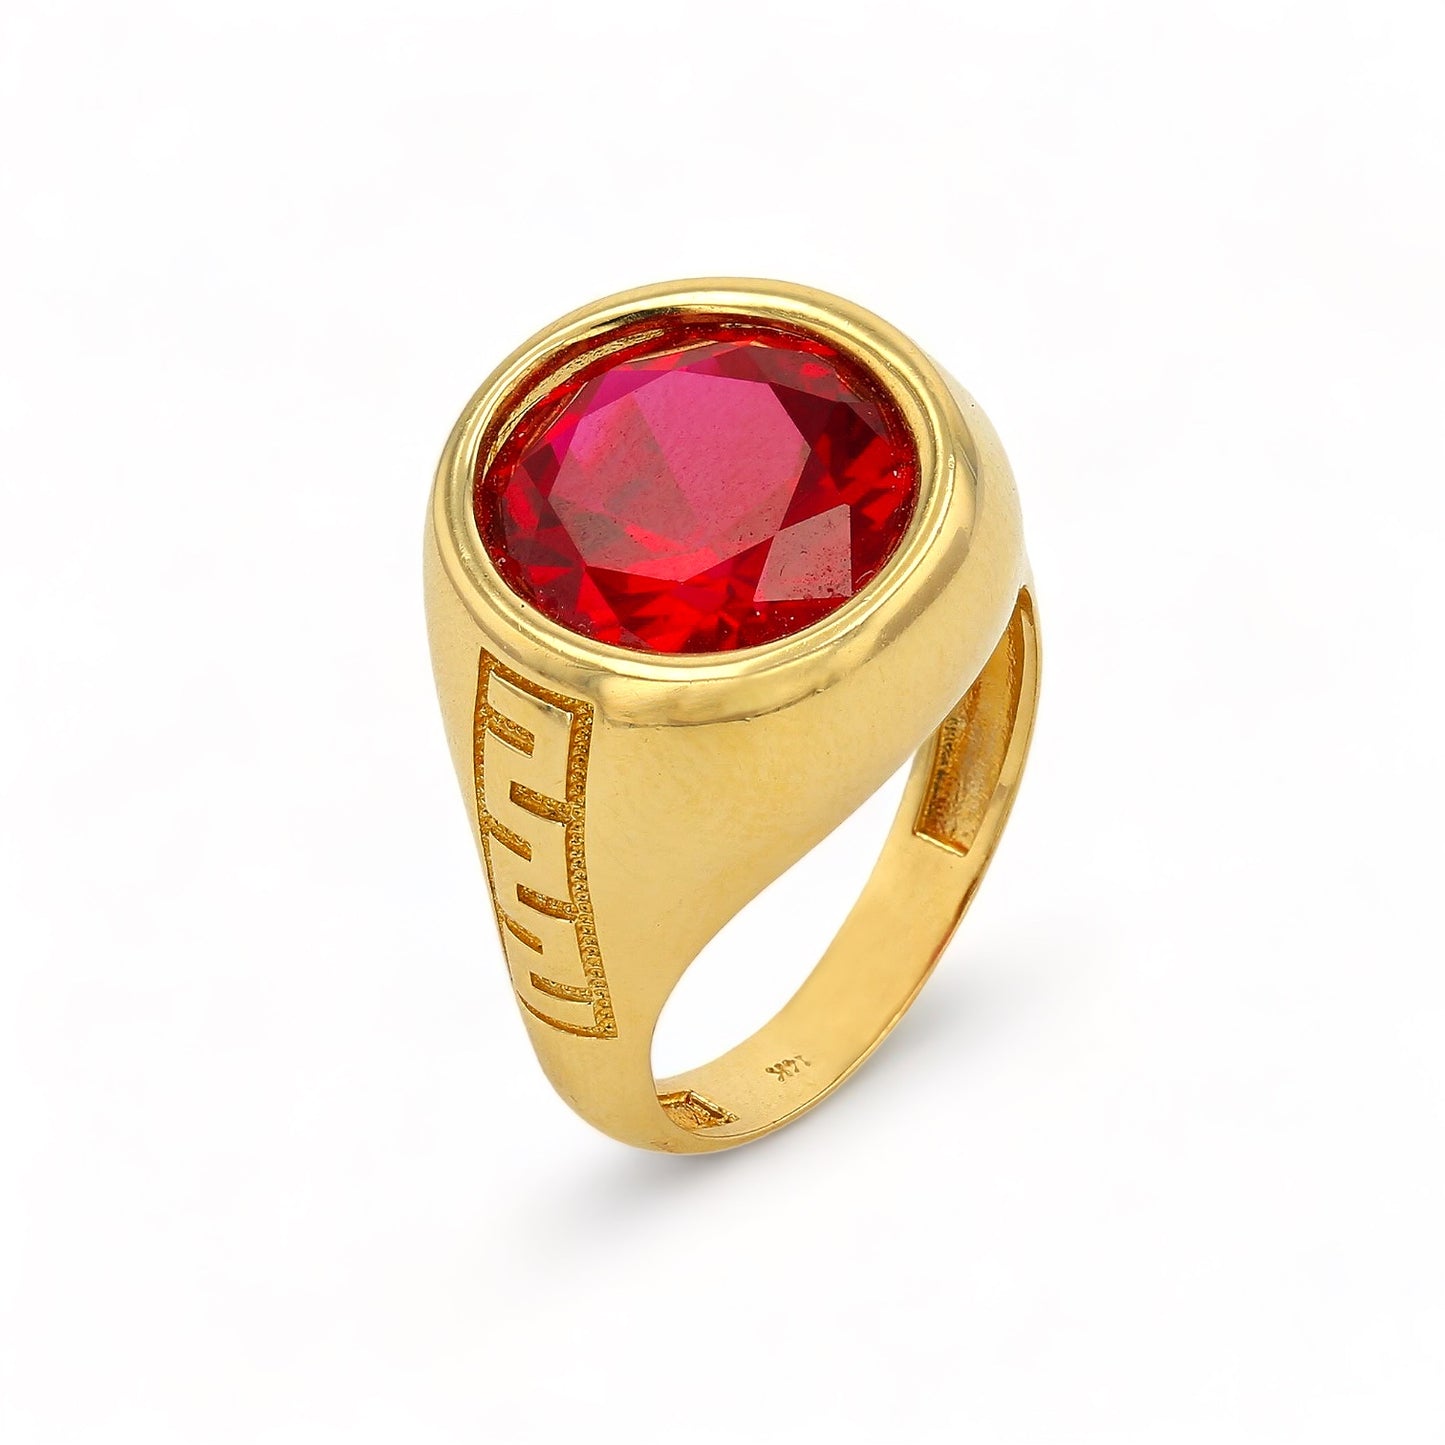 14K Yellow Gold Ring with Fire Red Stone - 220635